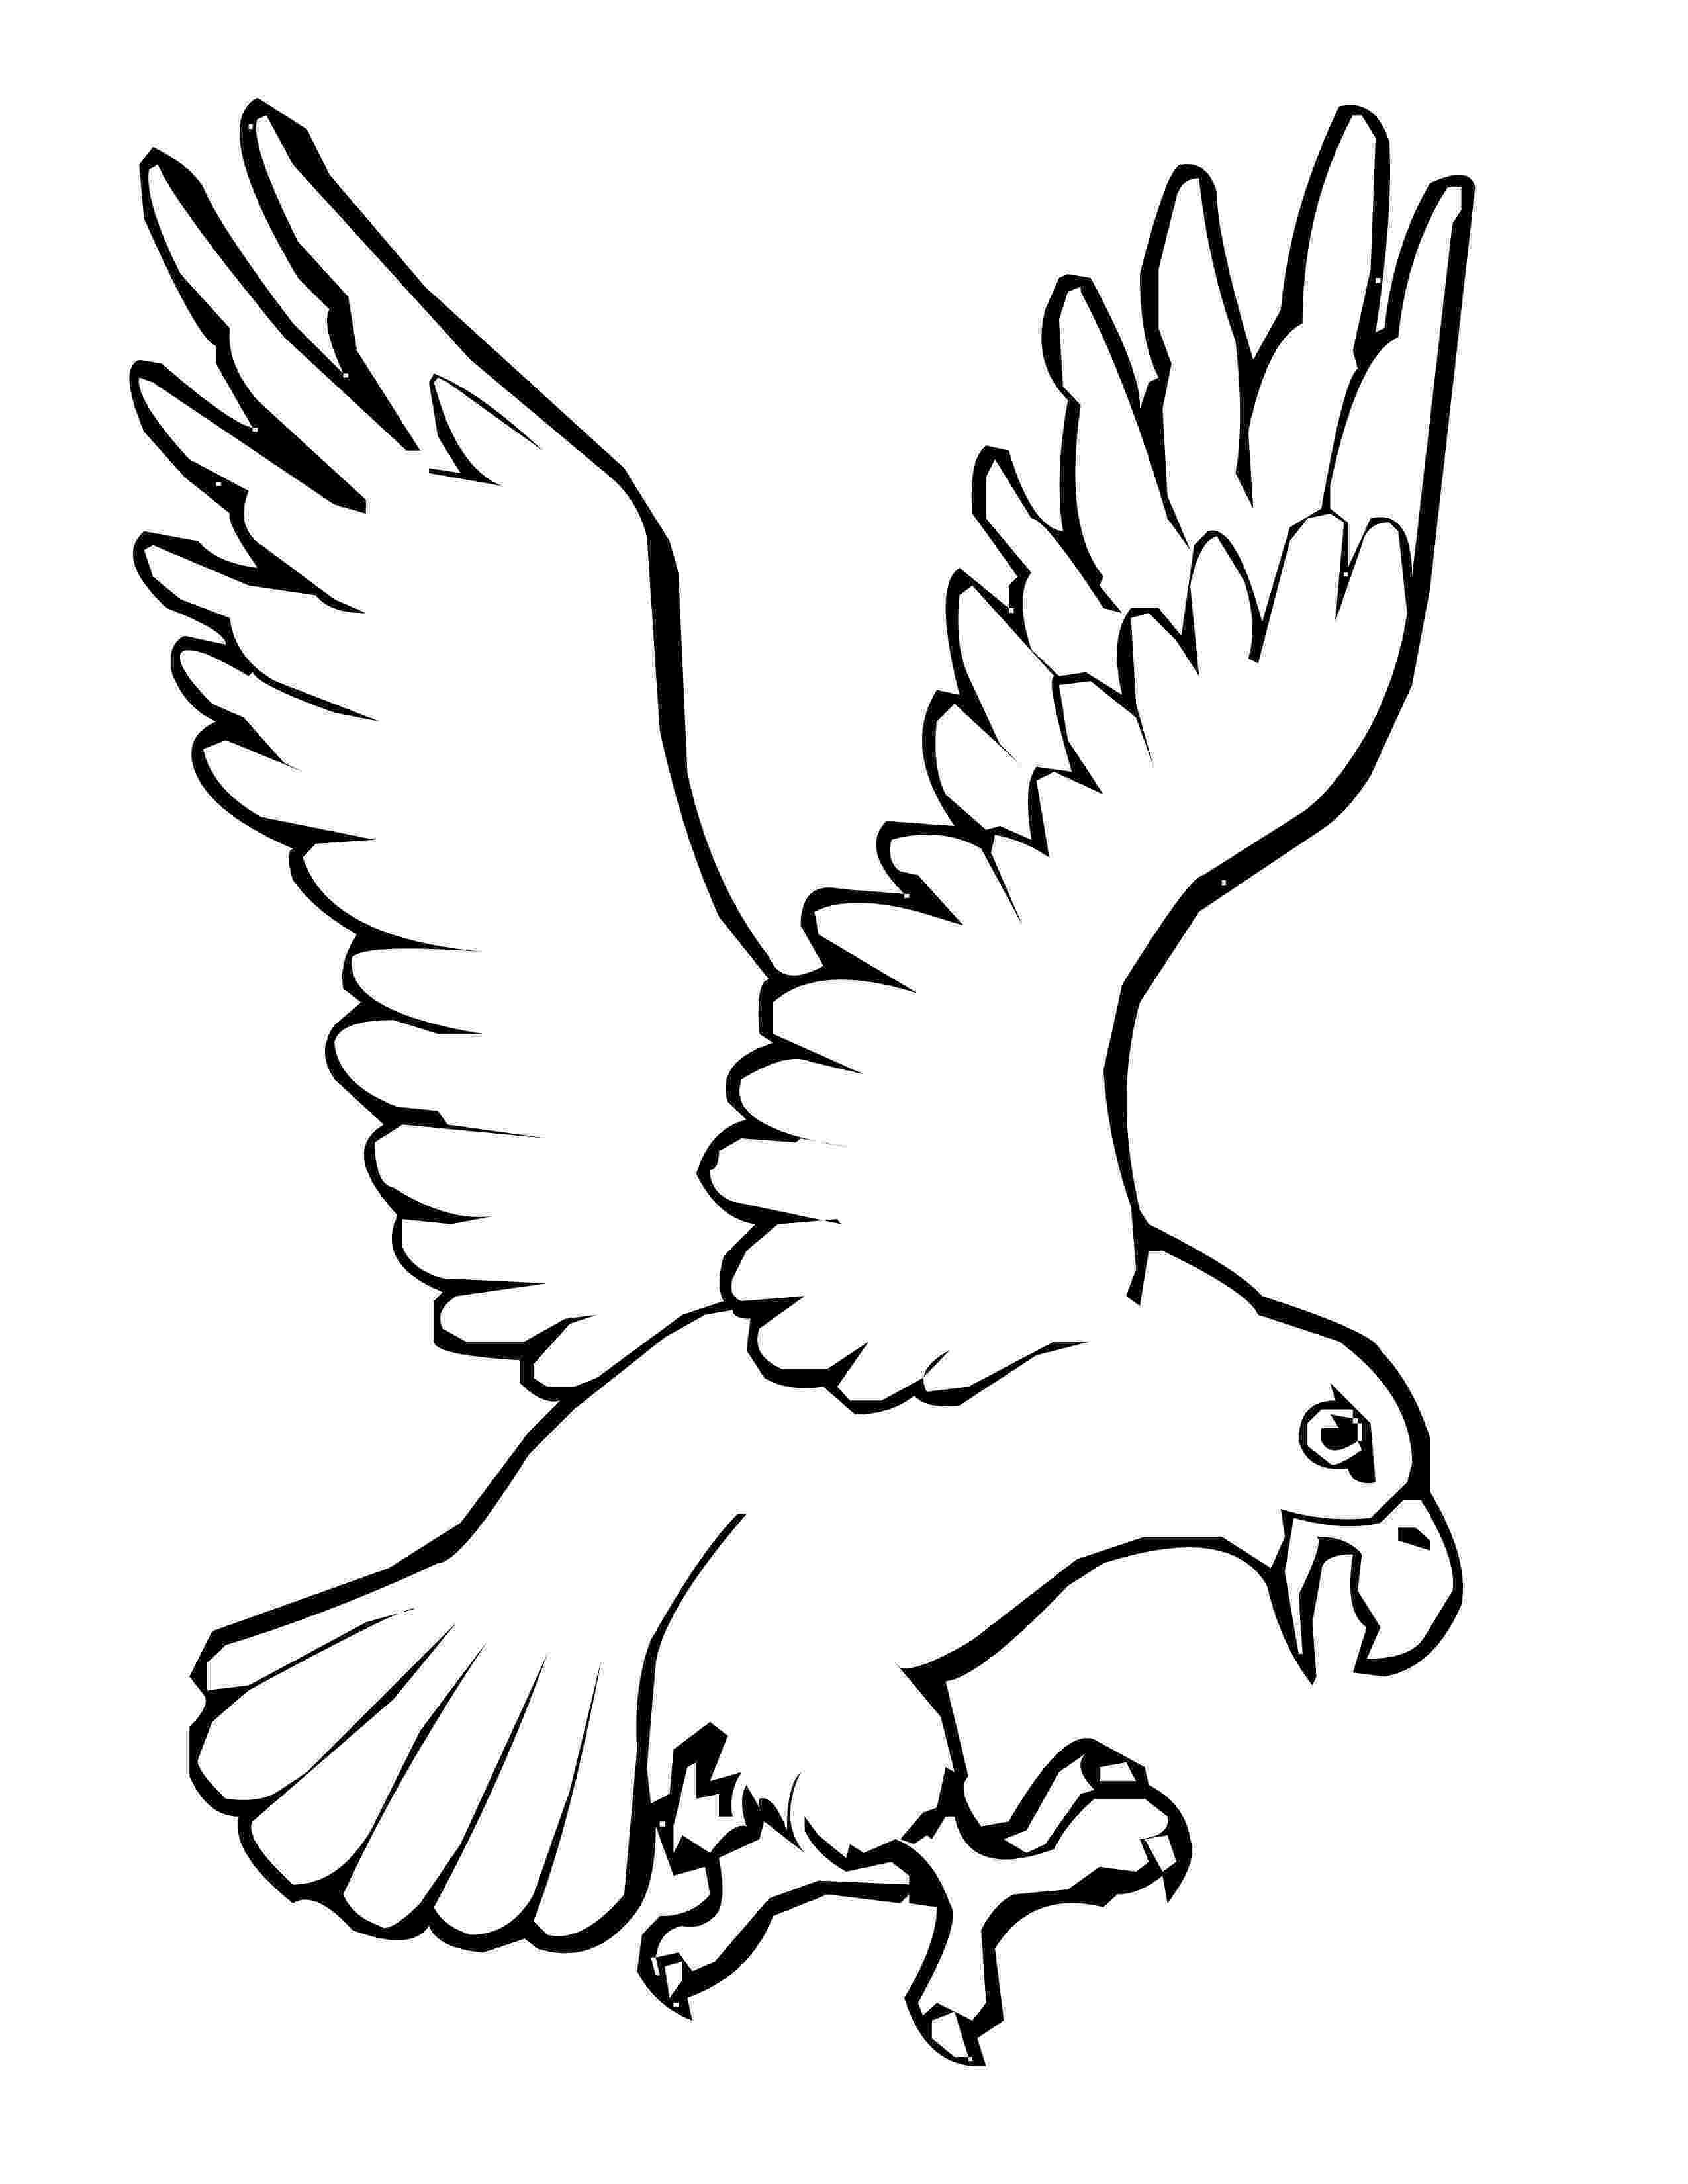 colouring pages with birds bird coloring pages with birds pages colouring 1 1